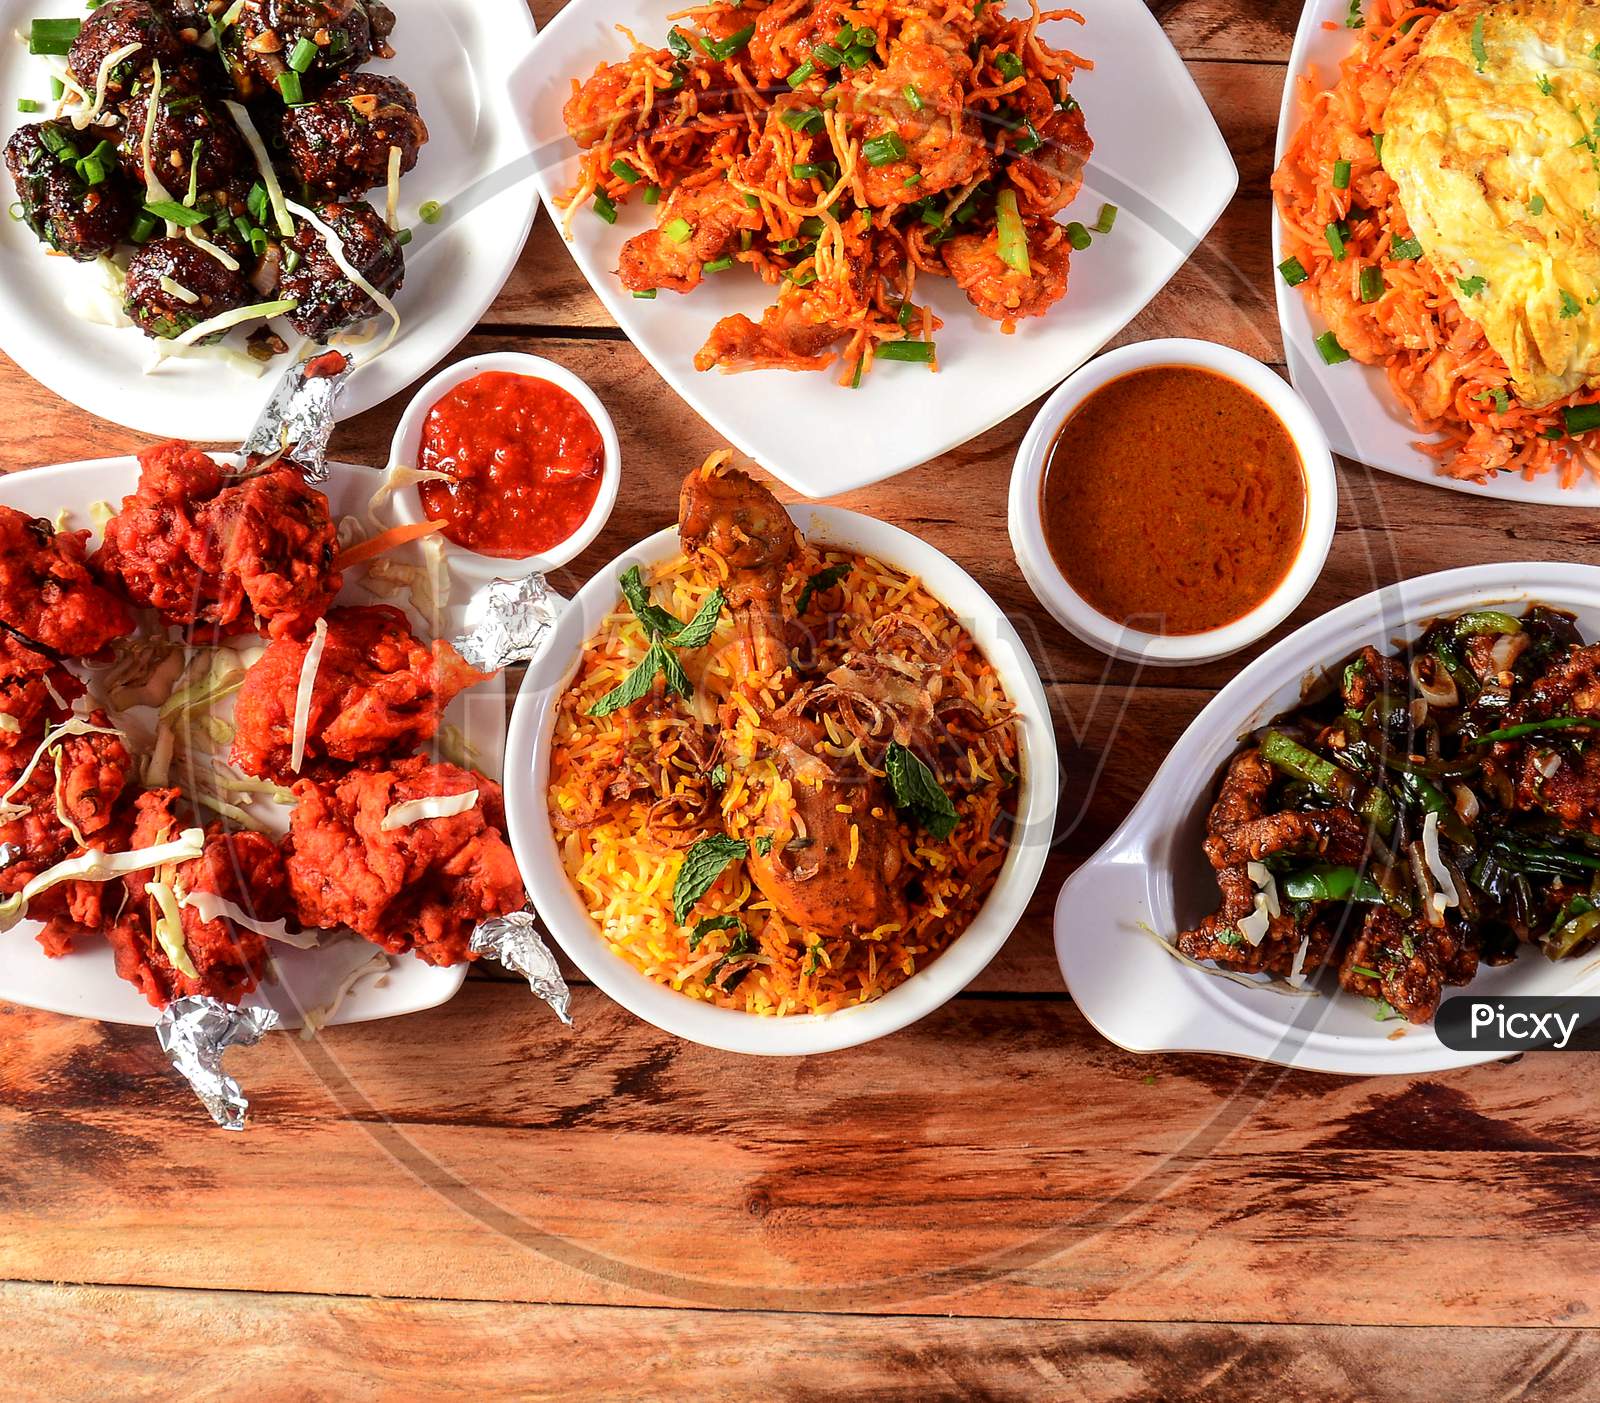 Assorted Indian Foods Chicken Biryani,Chicken Lollipop,Pepper Chicken And Pepper Gobi On Wooden Background. Dishes And Appetizers Of Indian Cuisine